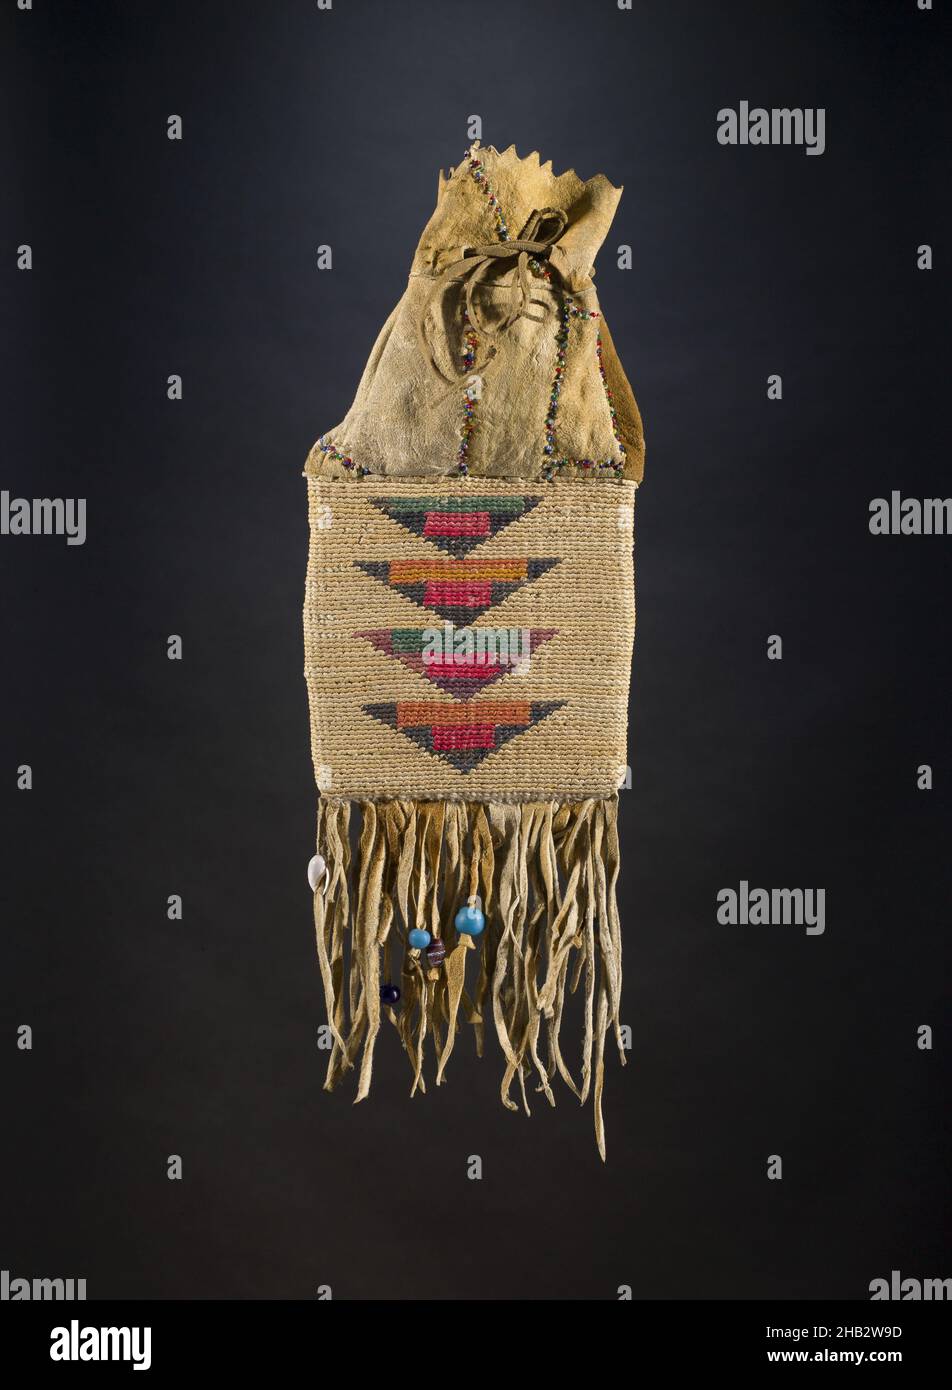 Bag, Nimi'ipuu (Nez Perce), c.1900, Tanned hide, corn husk, dye, glass beads, and shell beads, Made in United States, North and Central America, Containers, jewelry & personal accessories, 16 × 5 1/2 in. (40.6 × 14 cm Stock Photo